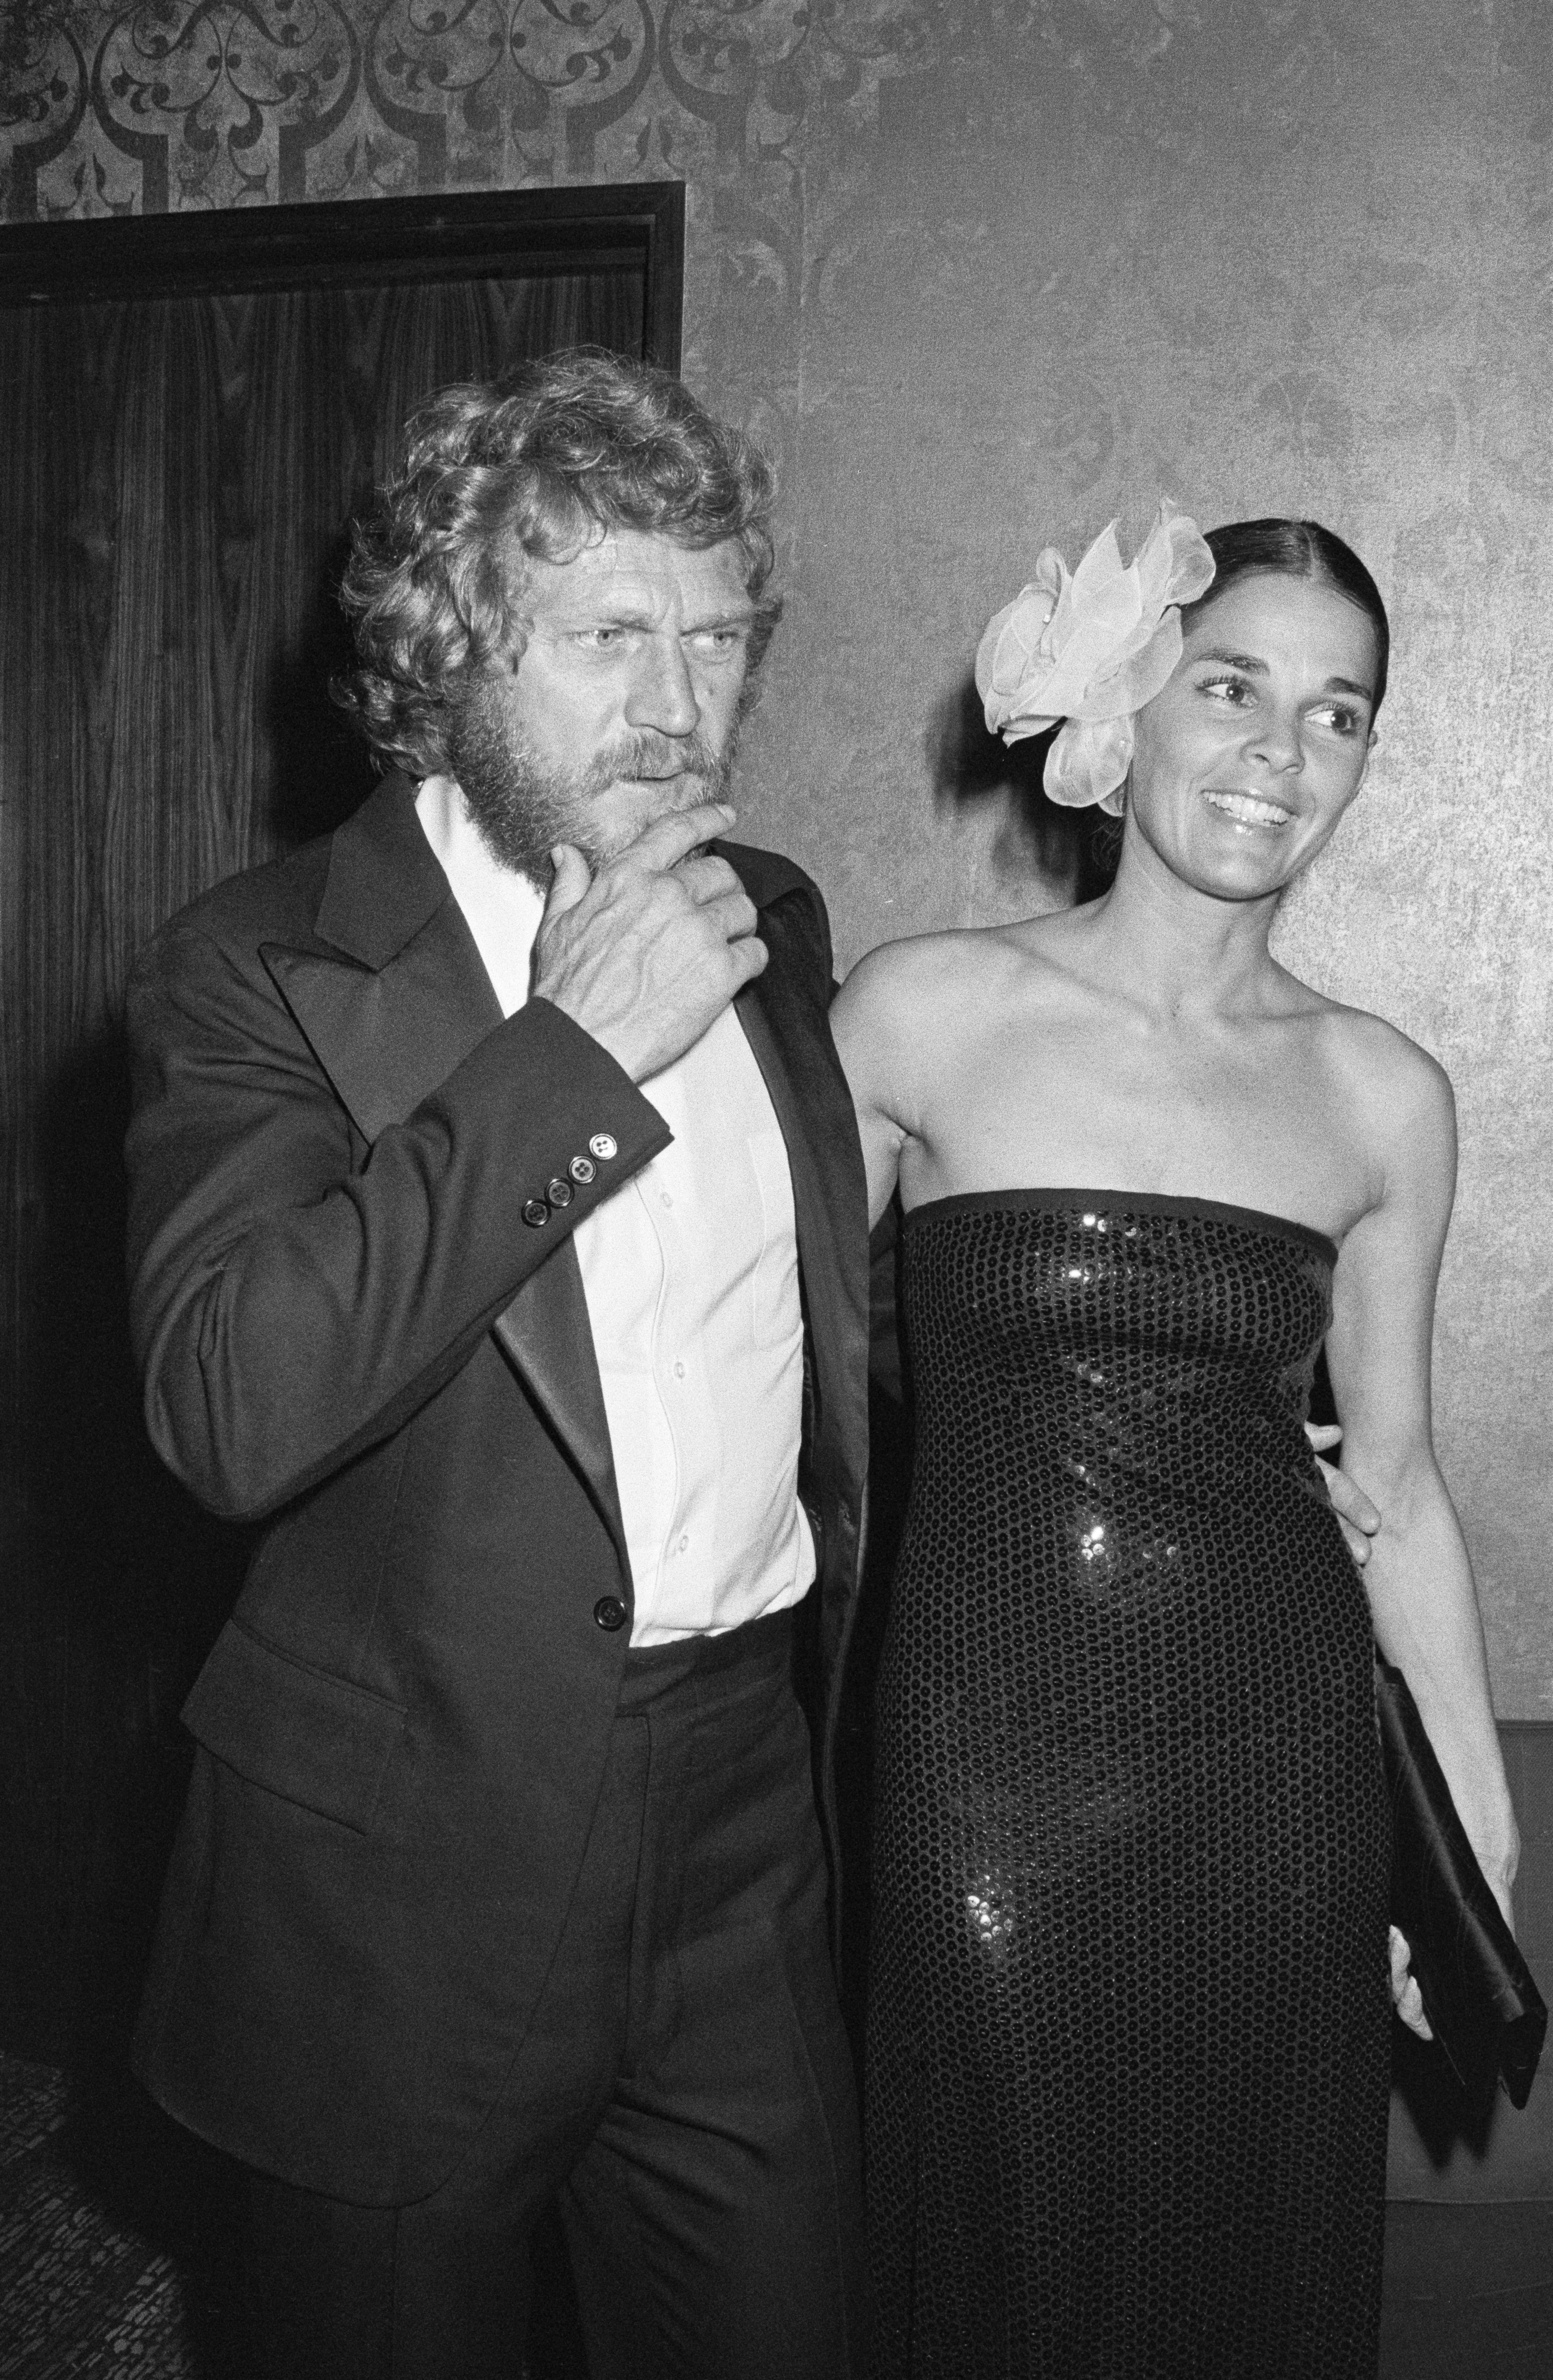 Ali MacGraw and Steve McQueen in a black and white image in 1974. | Source: Tony Korody/Sygma/Getty Images